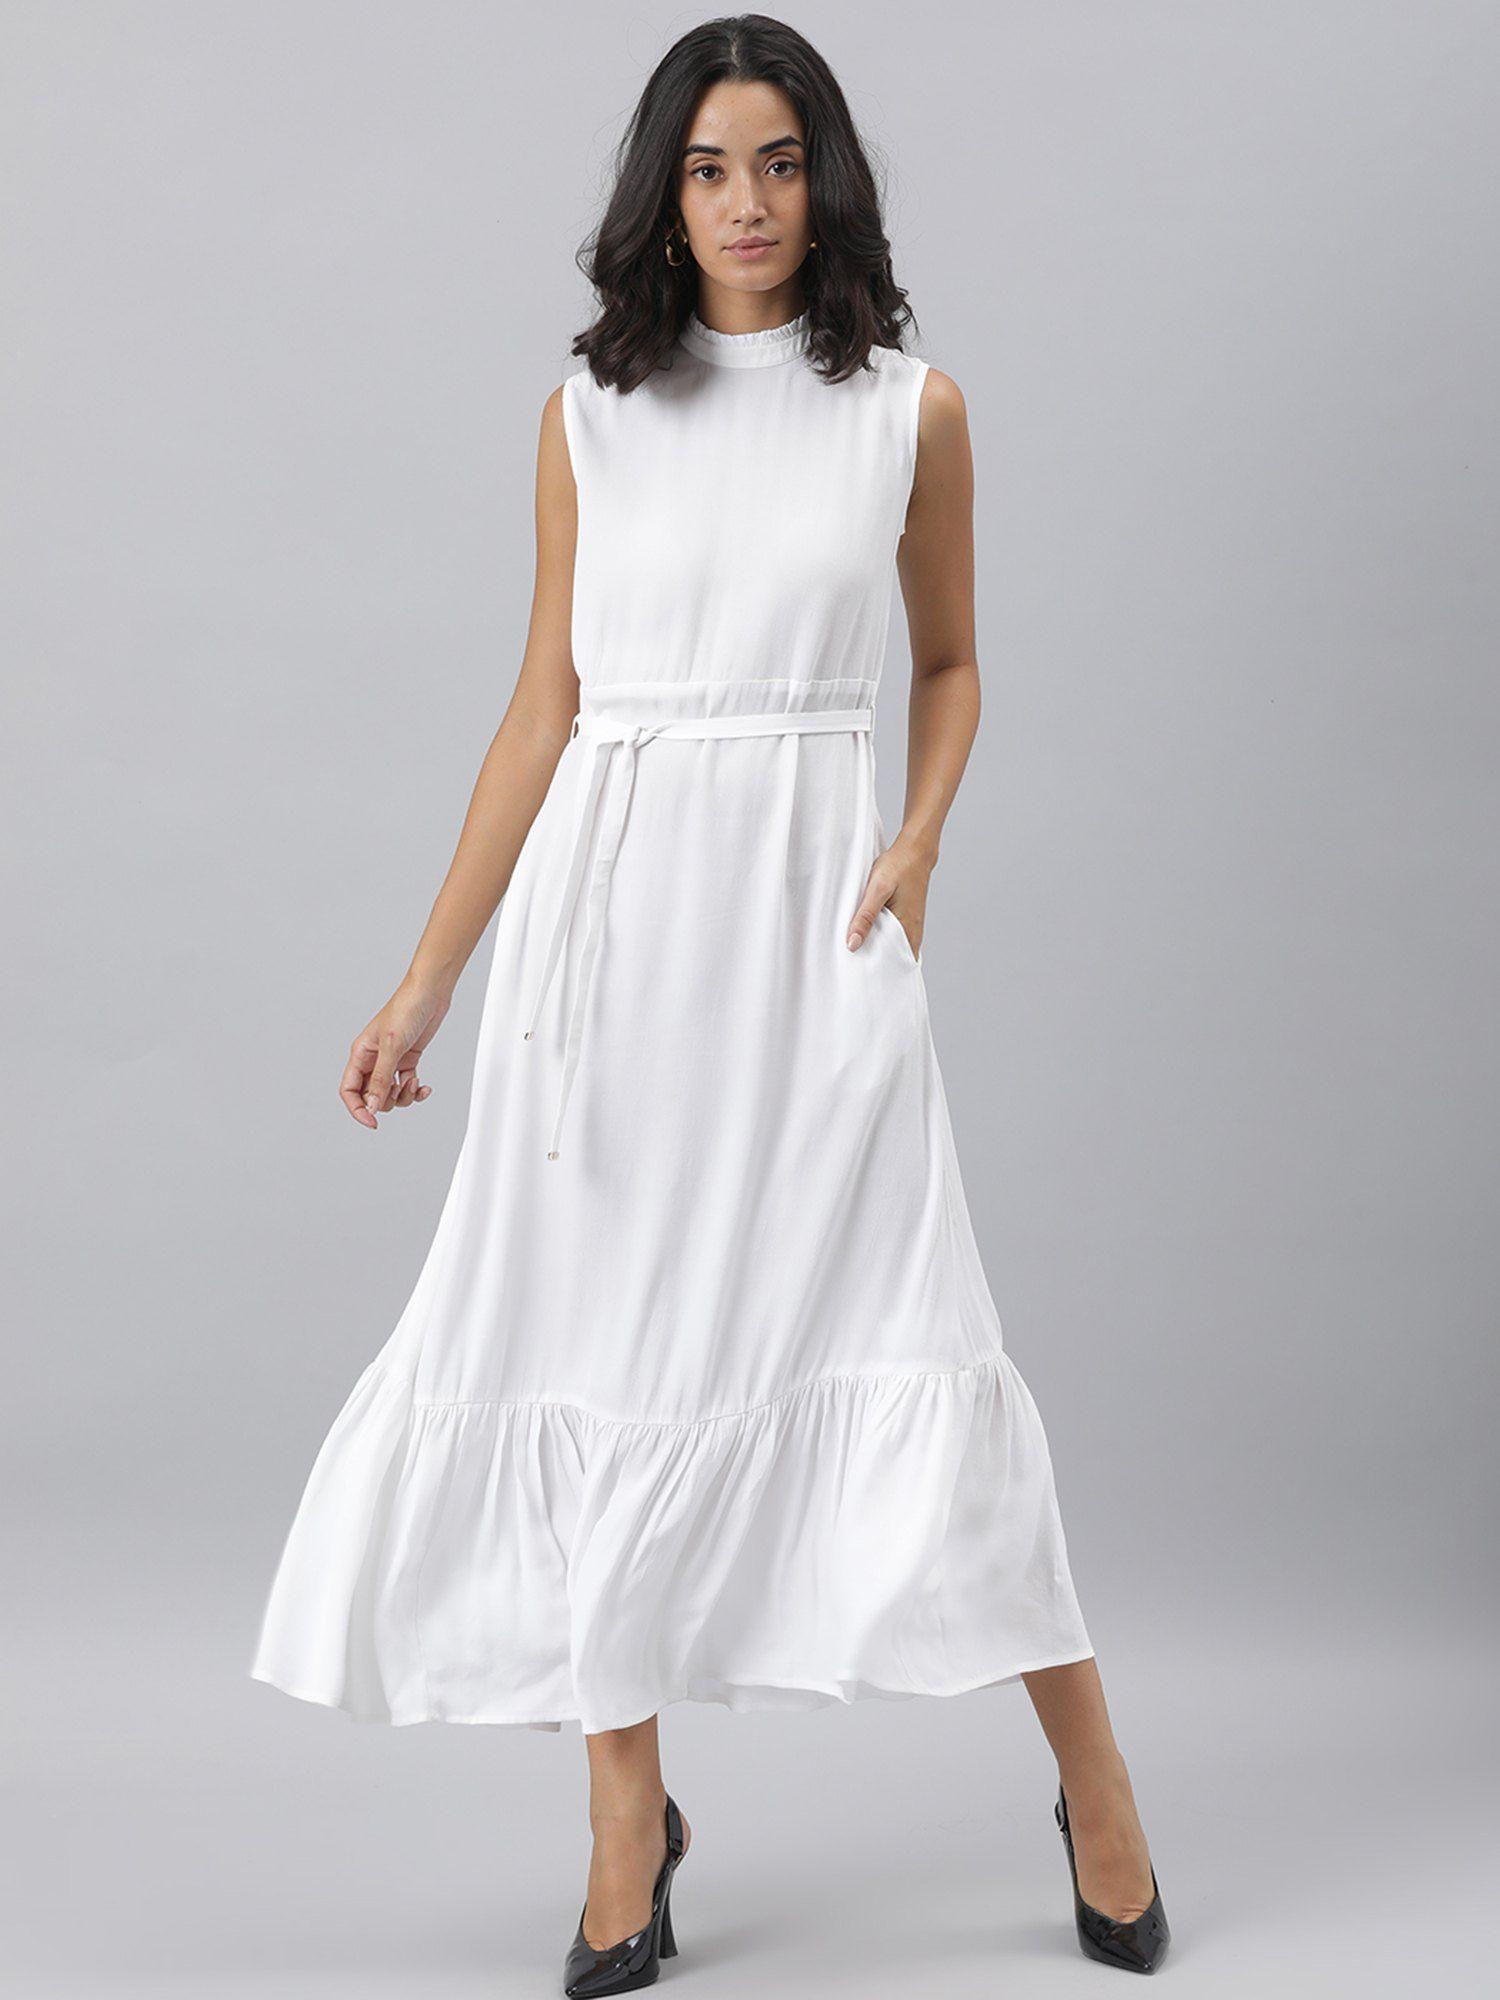 lilies white dress with belt